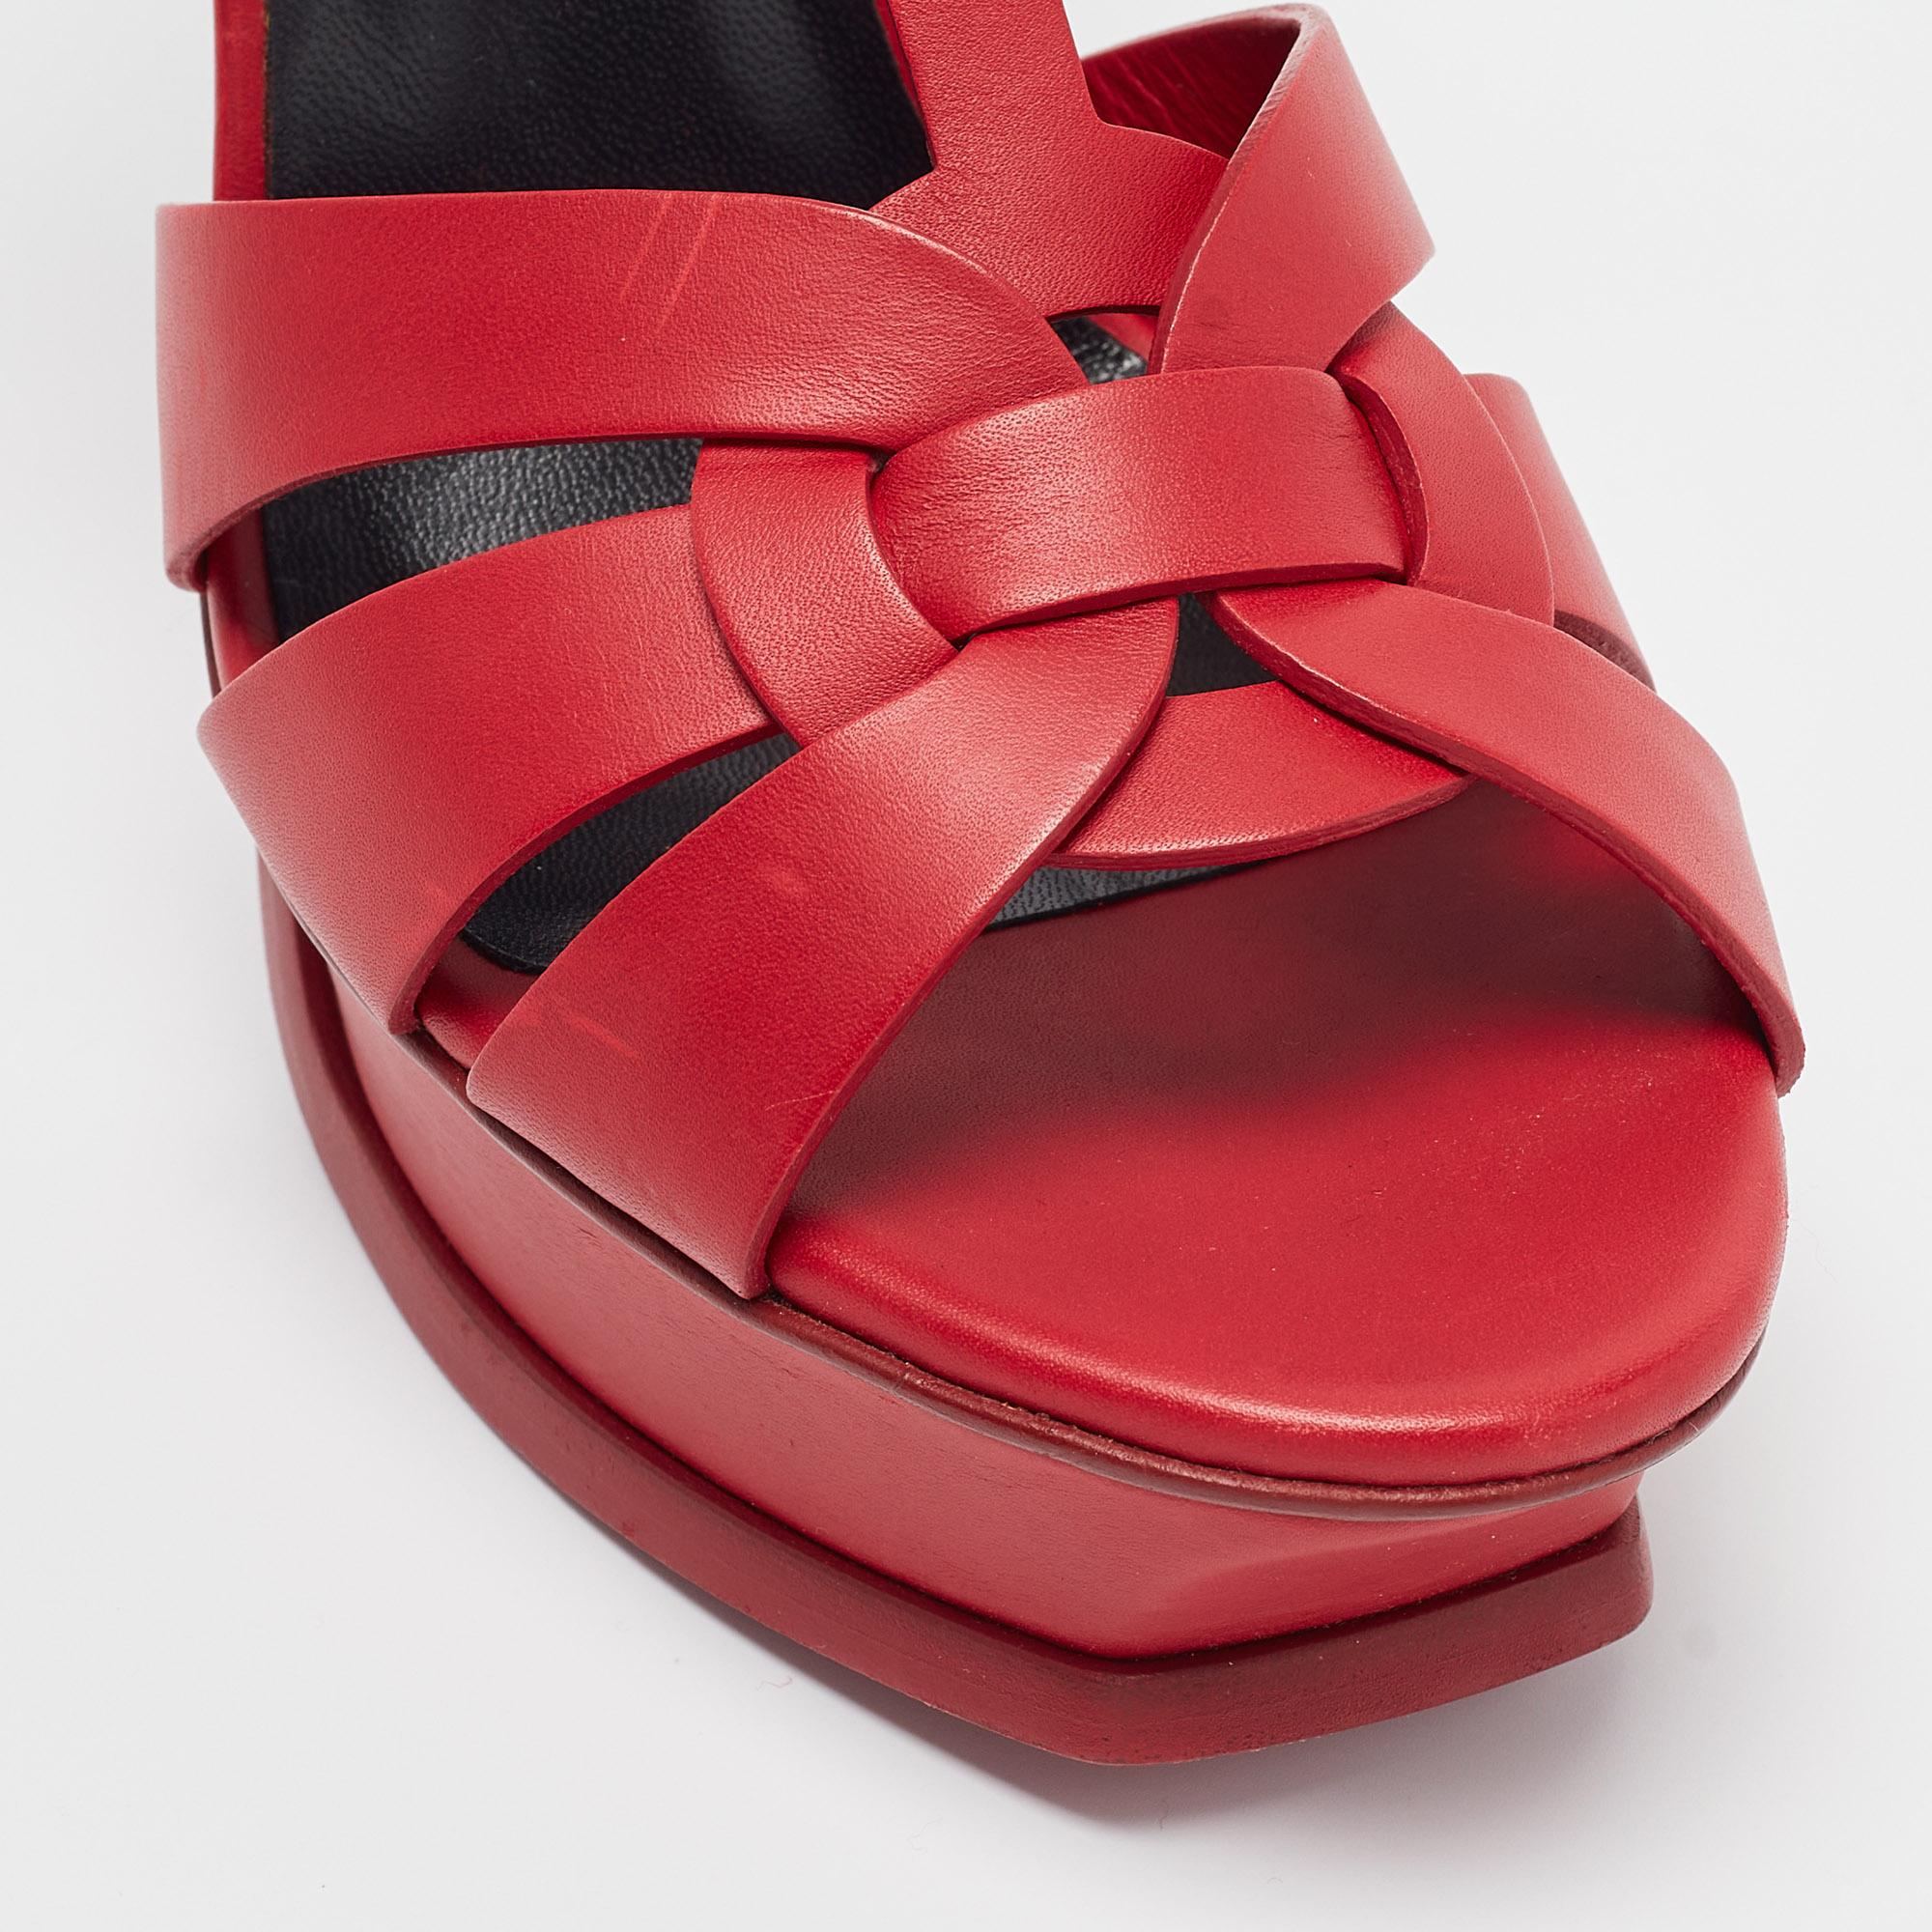 Saint Laurent Red Leather Tribute Sandals Size 38.5 For Sale 1